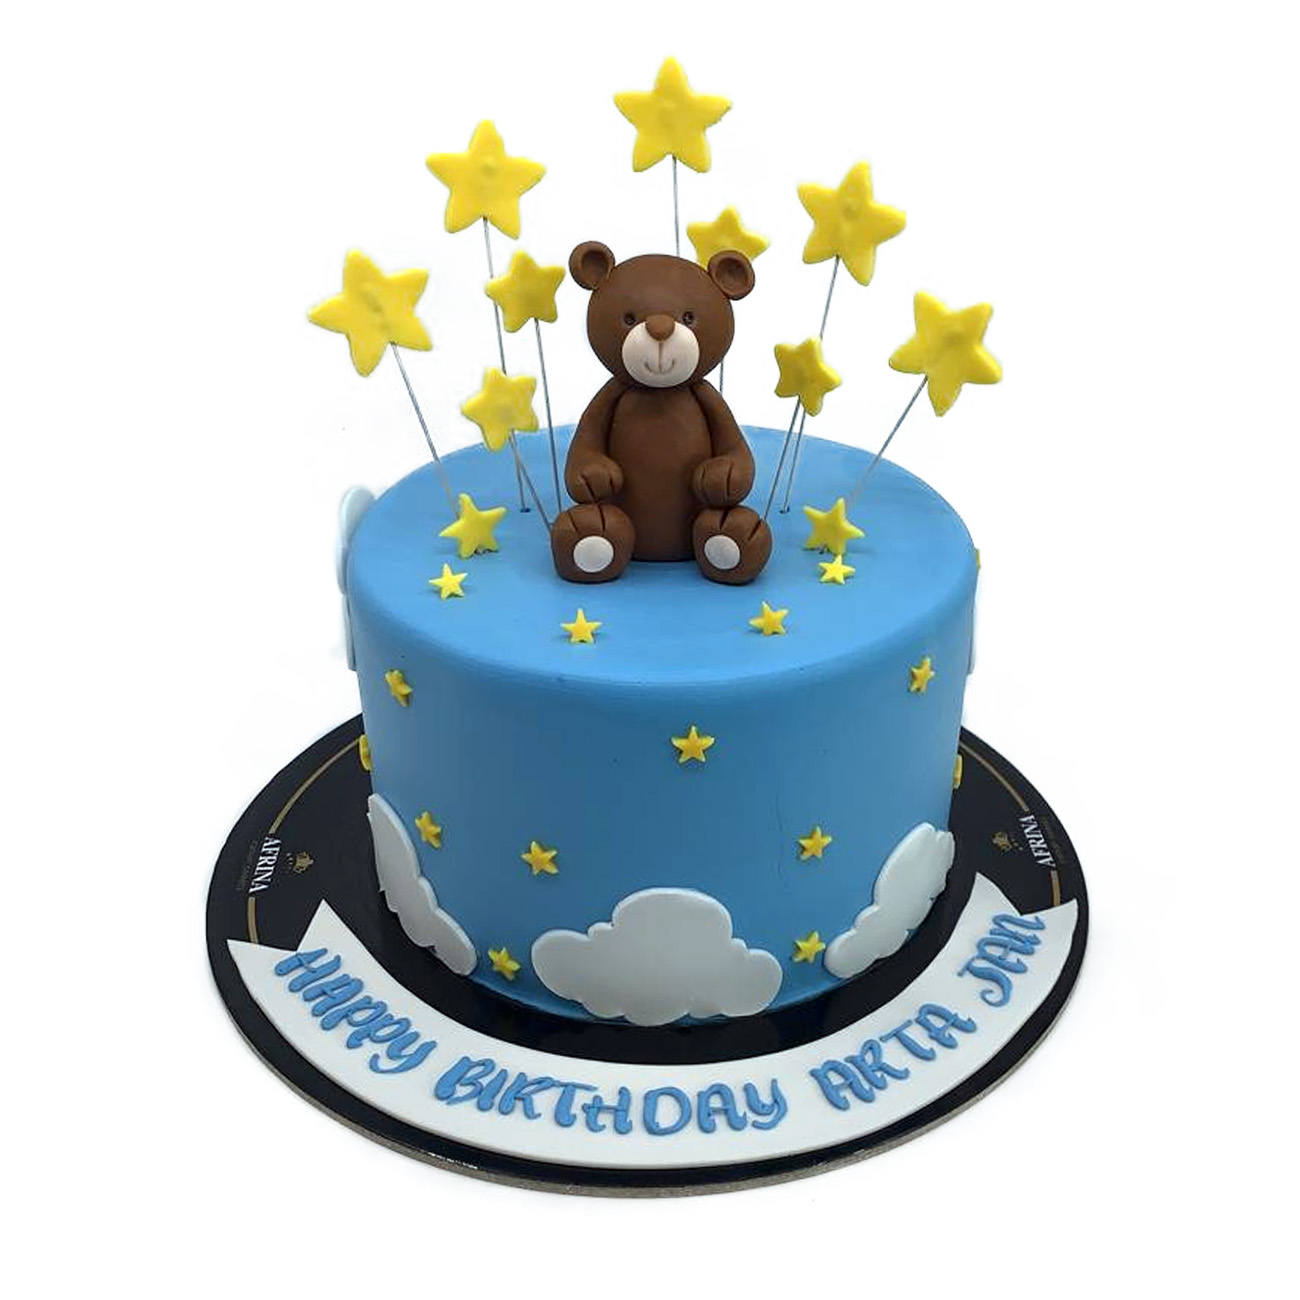 Teddy Bear - Edible Cake Topper | Sugarpaste Toppers | Cake Decorations